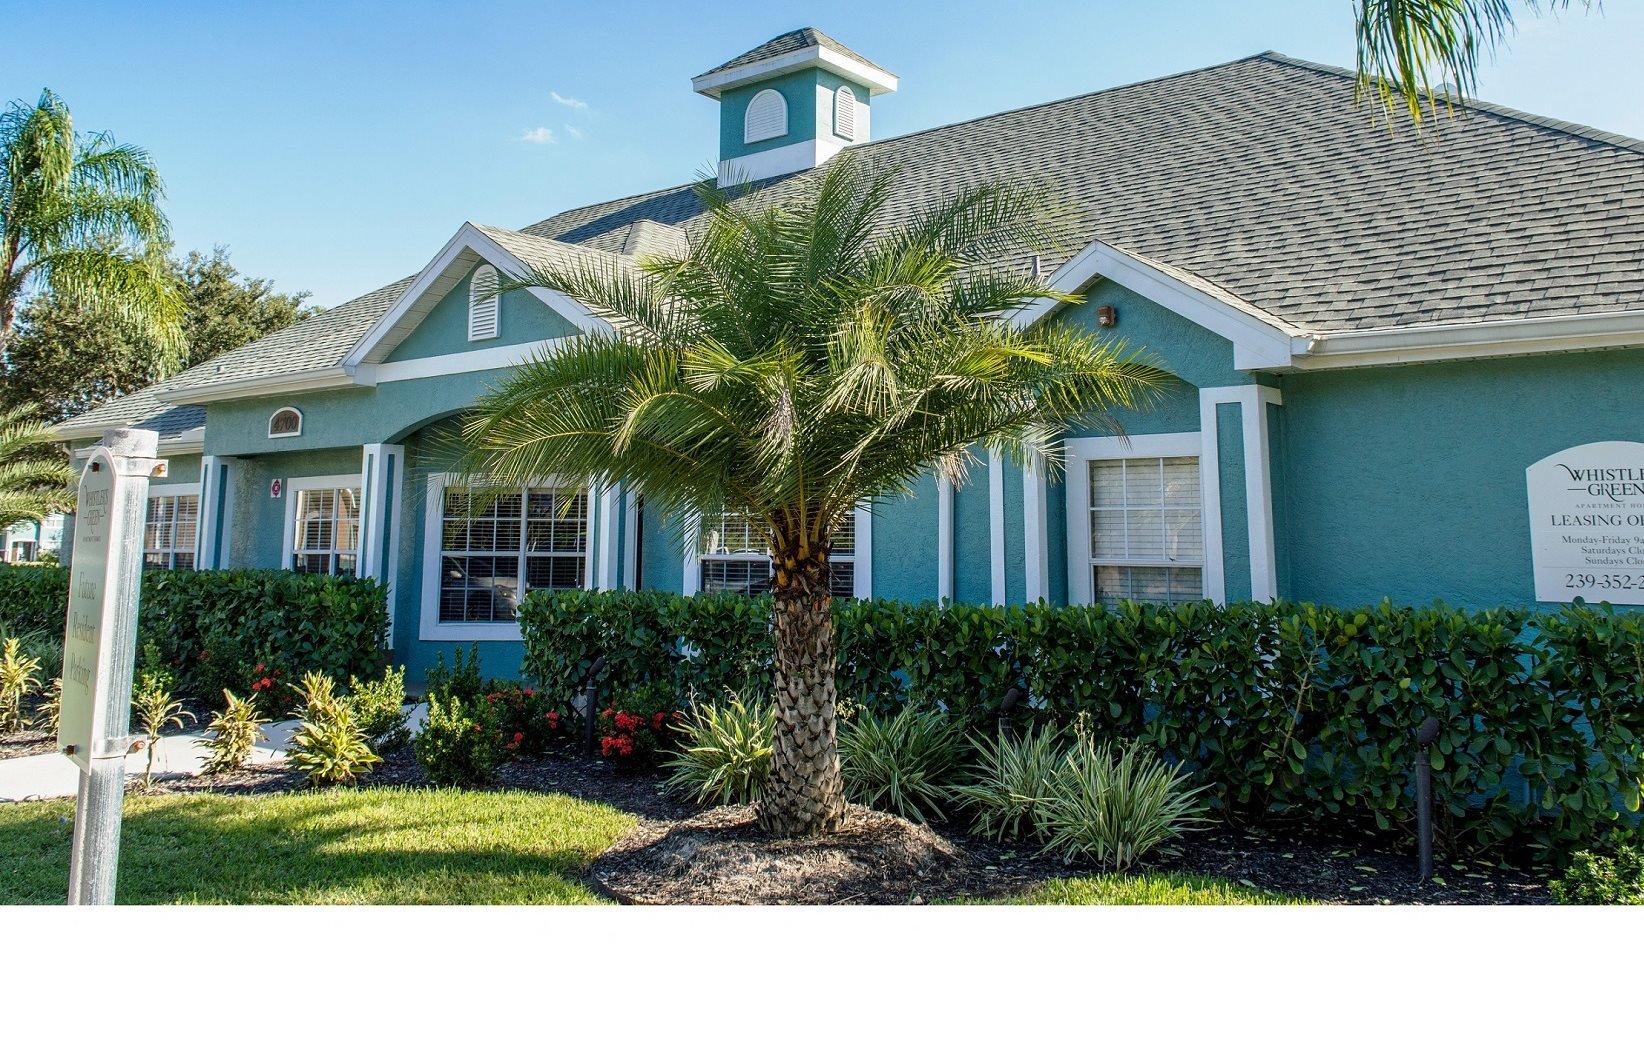 Whistler S Green Apartments Apartments In Naples Fl